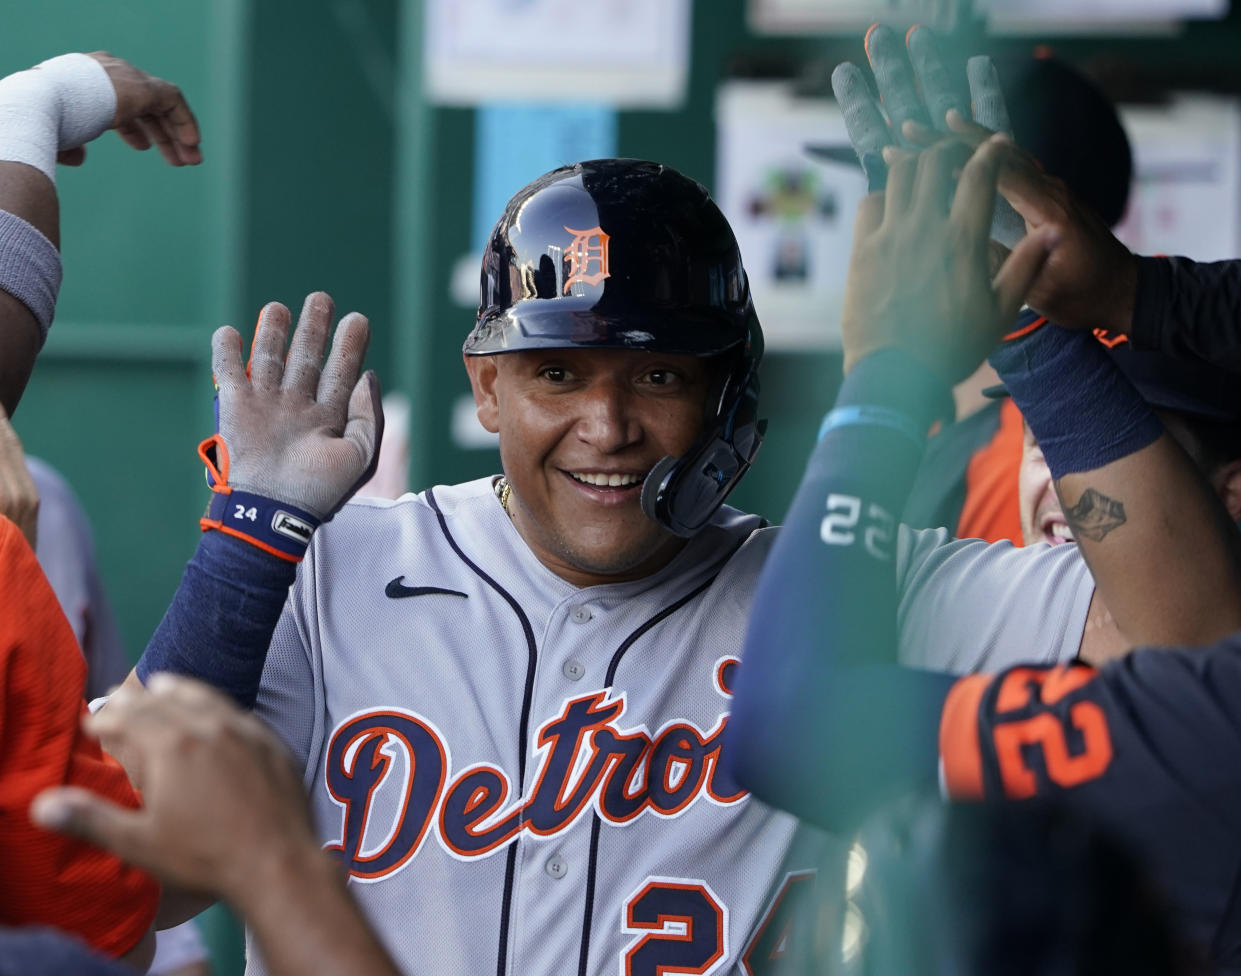 KANSAS CITY, MISSOURI - JULY 24:  Miguel Cabrera #24 of the Detroit Tigers celebrates after scoring in the second inning against the Kansas City Royals at Kauffman Stadium on July 24, 2021 in Kansas City, Missouri. (Photo by Ed Zurga/Getty Images)